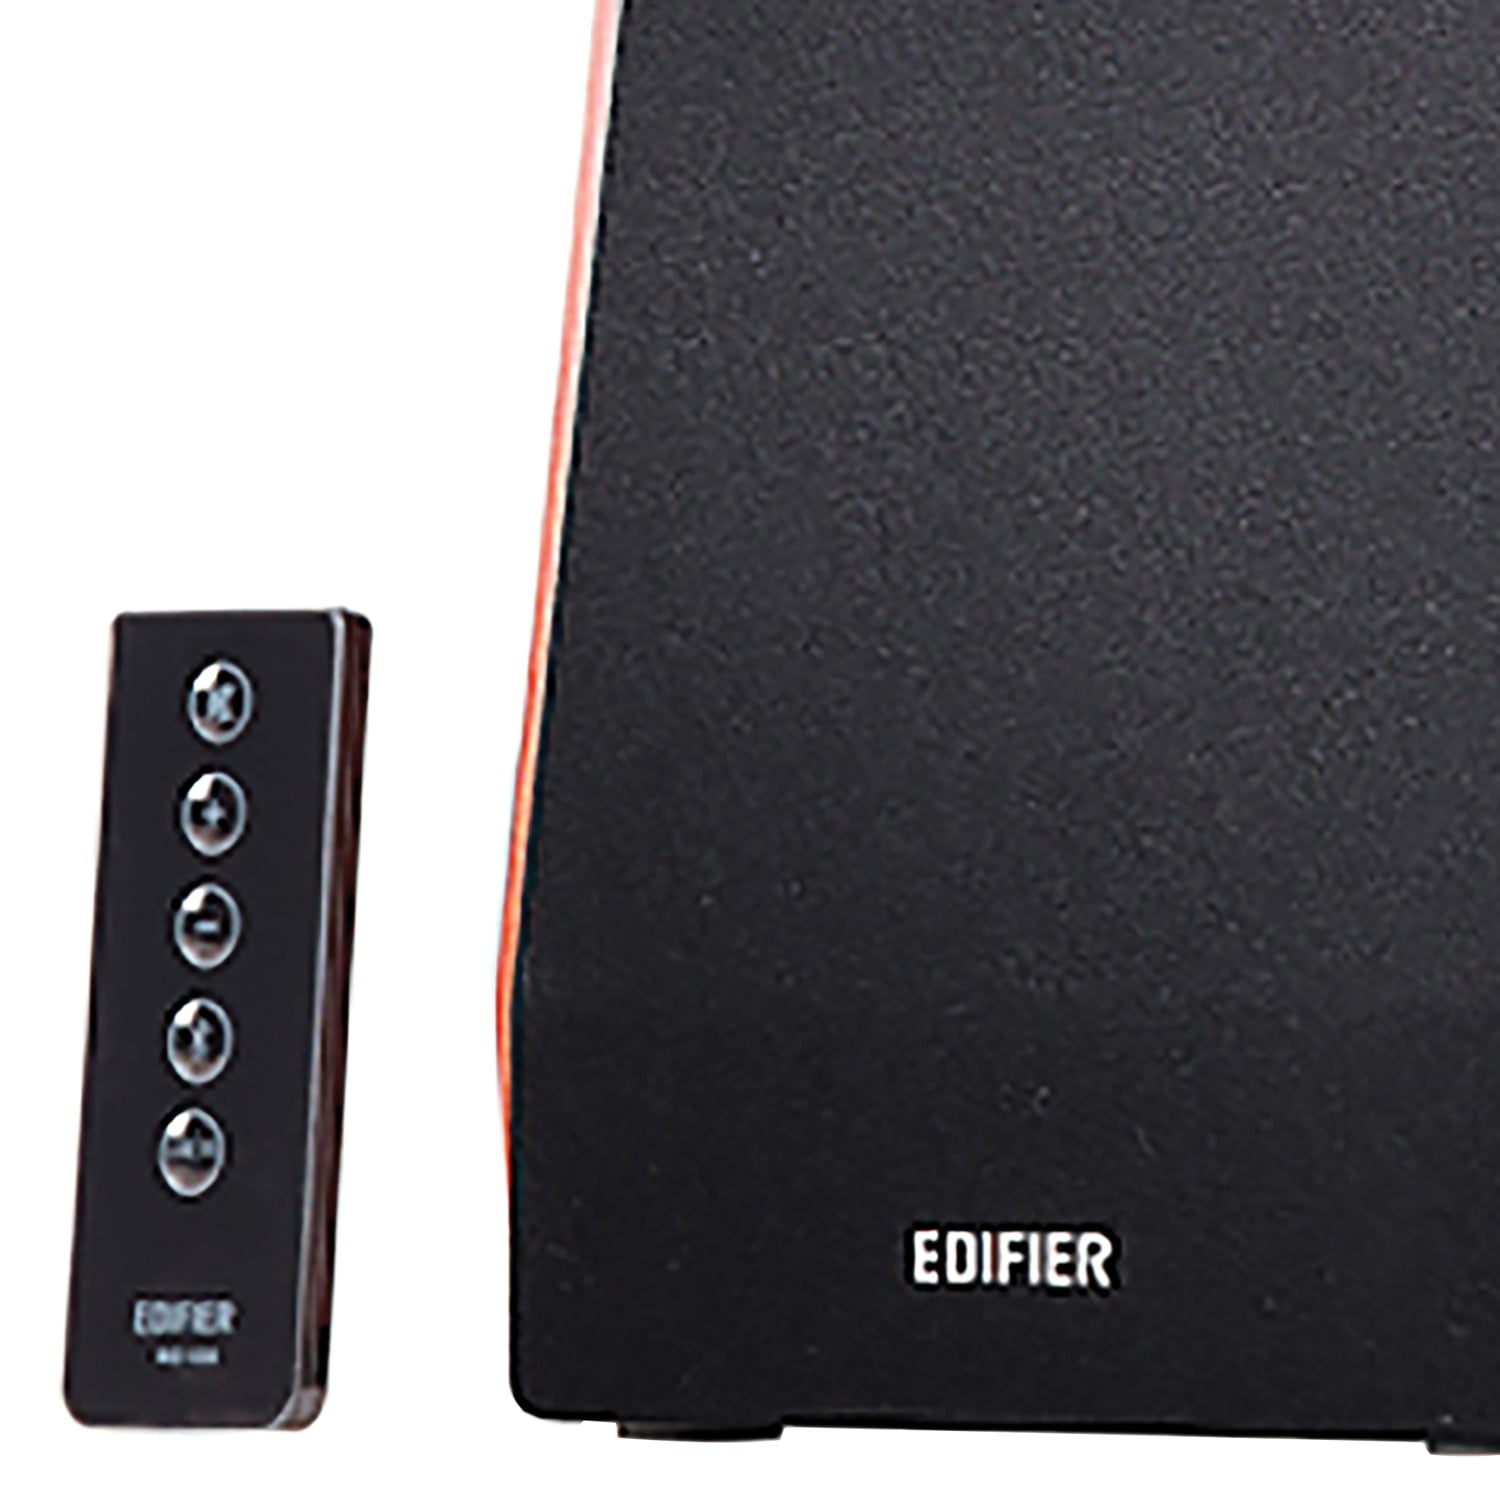  Edifier R1700BTs Active Bluetooth Bookshelf Speakers - 2.0  Wireless Near Field Studio Monitor Speaker - 66w RMS with Subwoofer Line  Out : Electronics